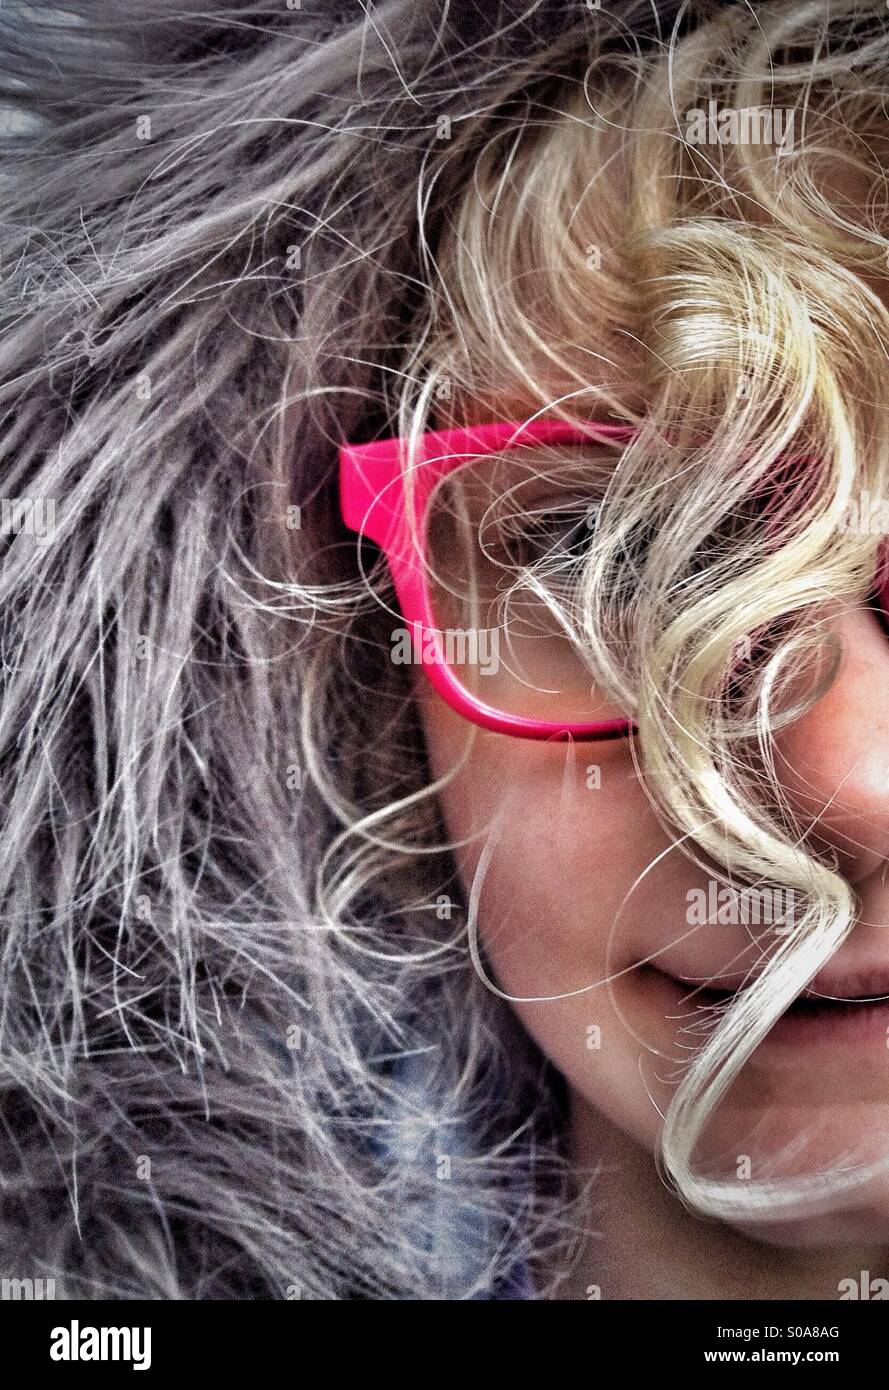 Young girl wearing furry hood and red glasses with face obscured by curly blond hair Stock Photo